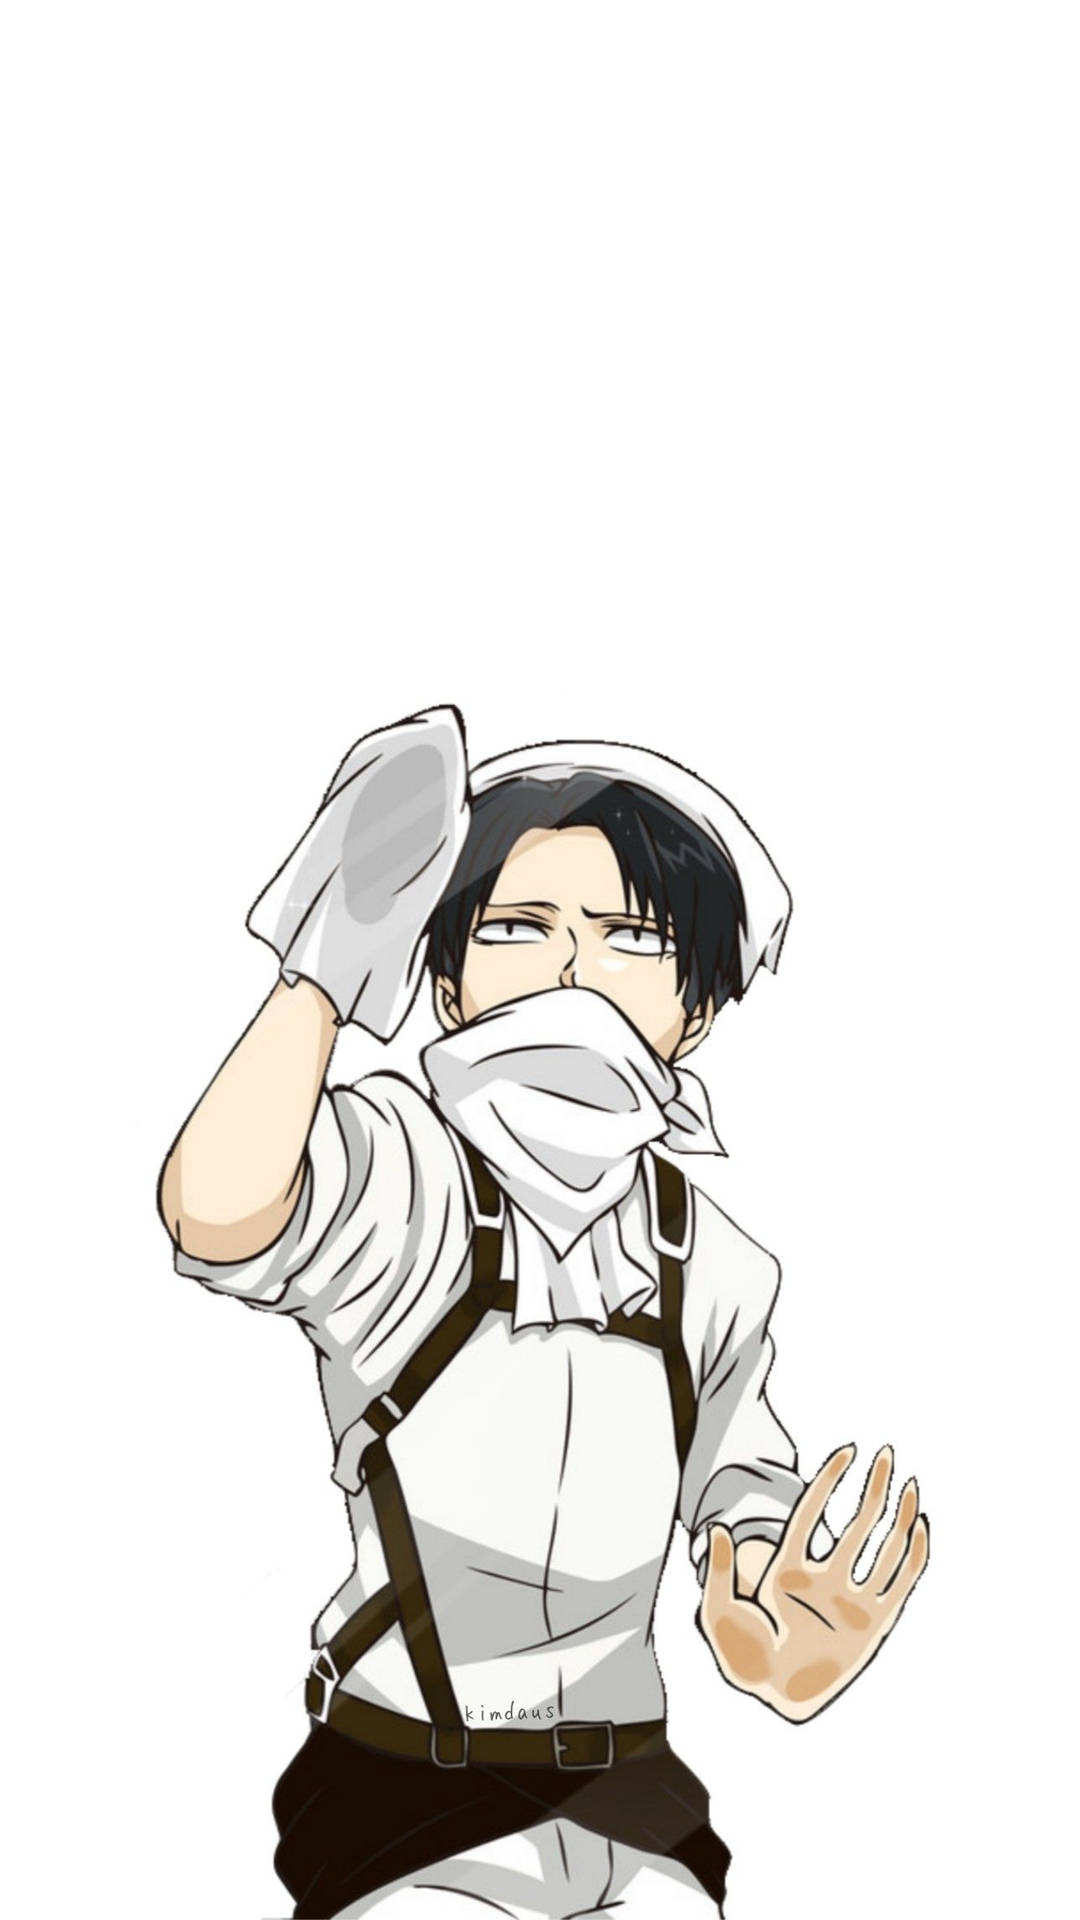 Levi Ackerman cleaning a phone's screen wallpaper.